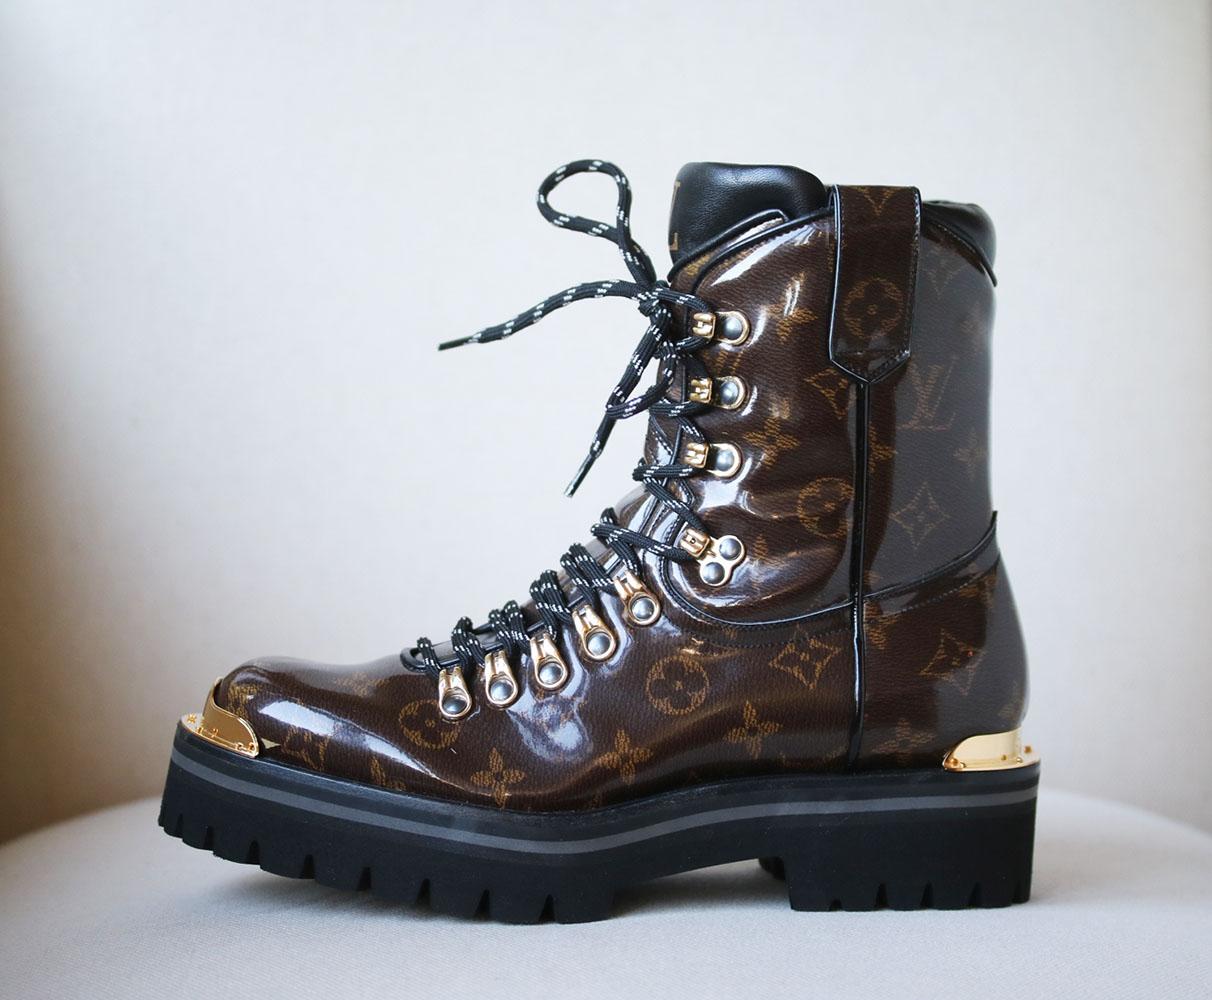 Unisex boots (mens sizing). Brown and tan glazed Monogram canvas Louis Vuitton Outland round-toe hiking boots. Gold-tone hardware. Rubber soles. Lace-tie closures at uppers. Round toe.  Upper: glazed canvas. Made in Italy. Does not come with a box. 